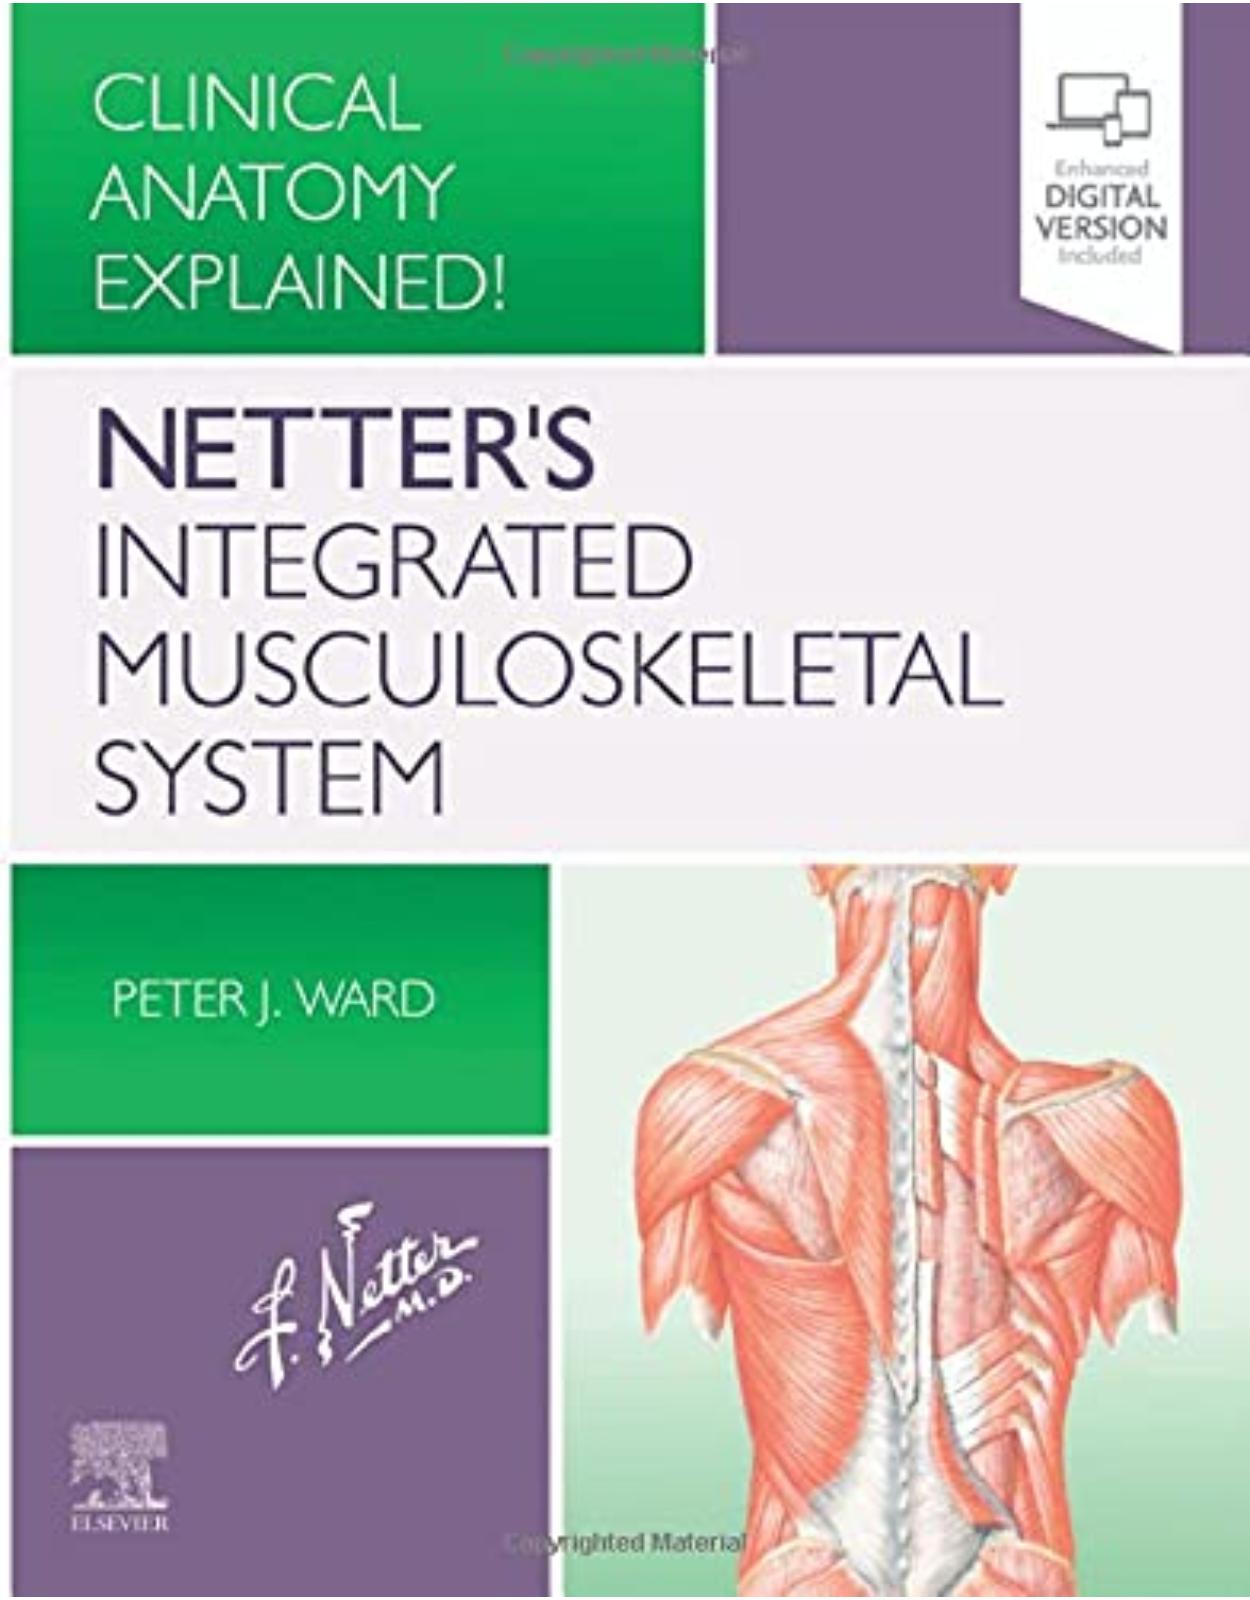 Netter’s Integrated Musculoskeletal System: Clinical Anatomy Explained!